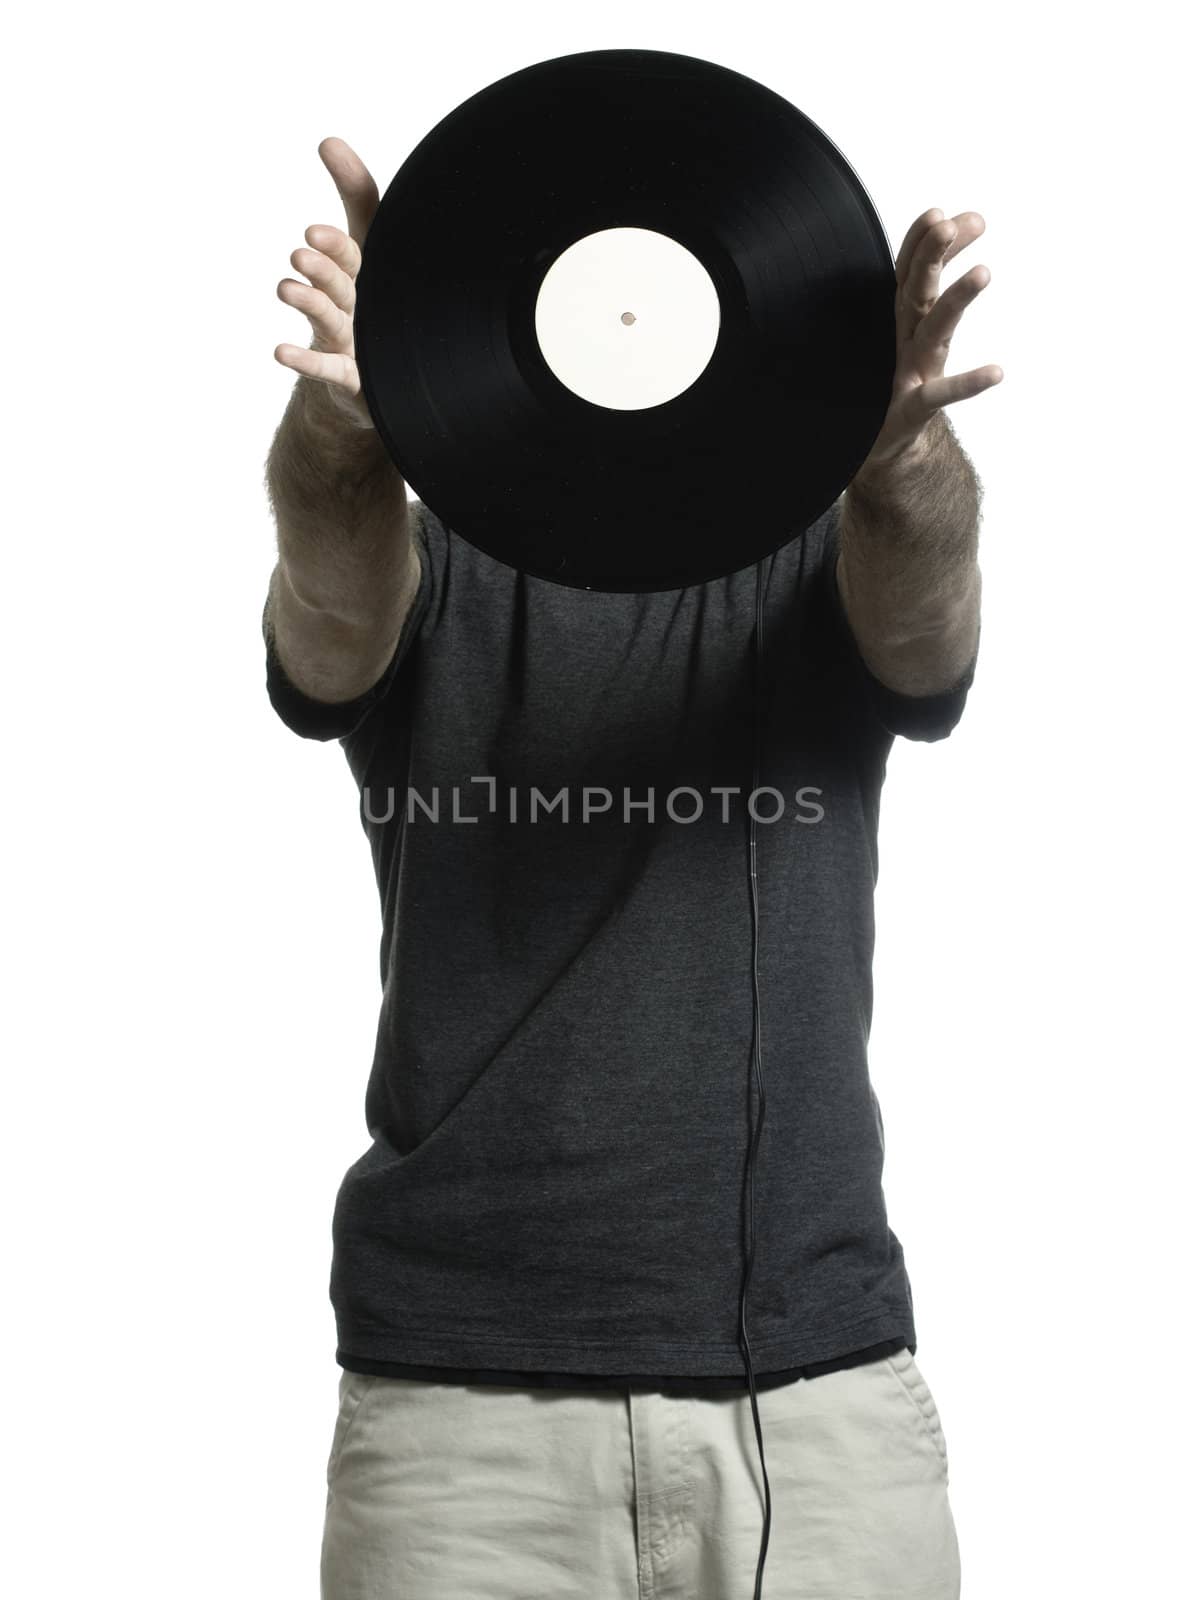 Man isolated on a white background is showing off an old lp record.